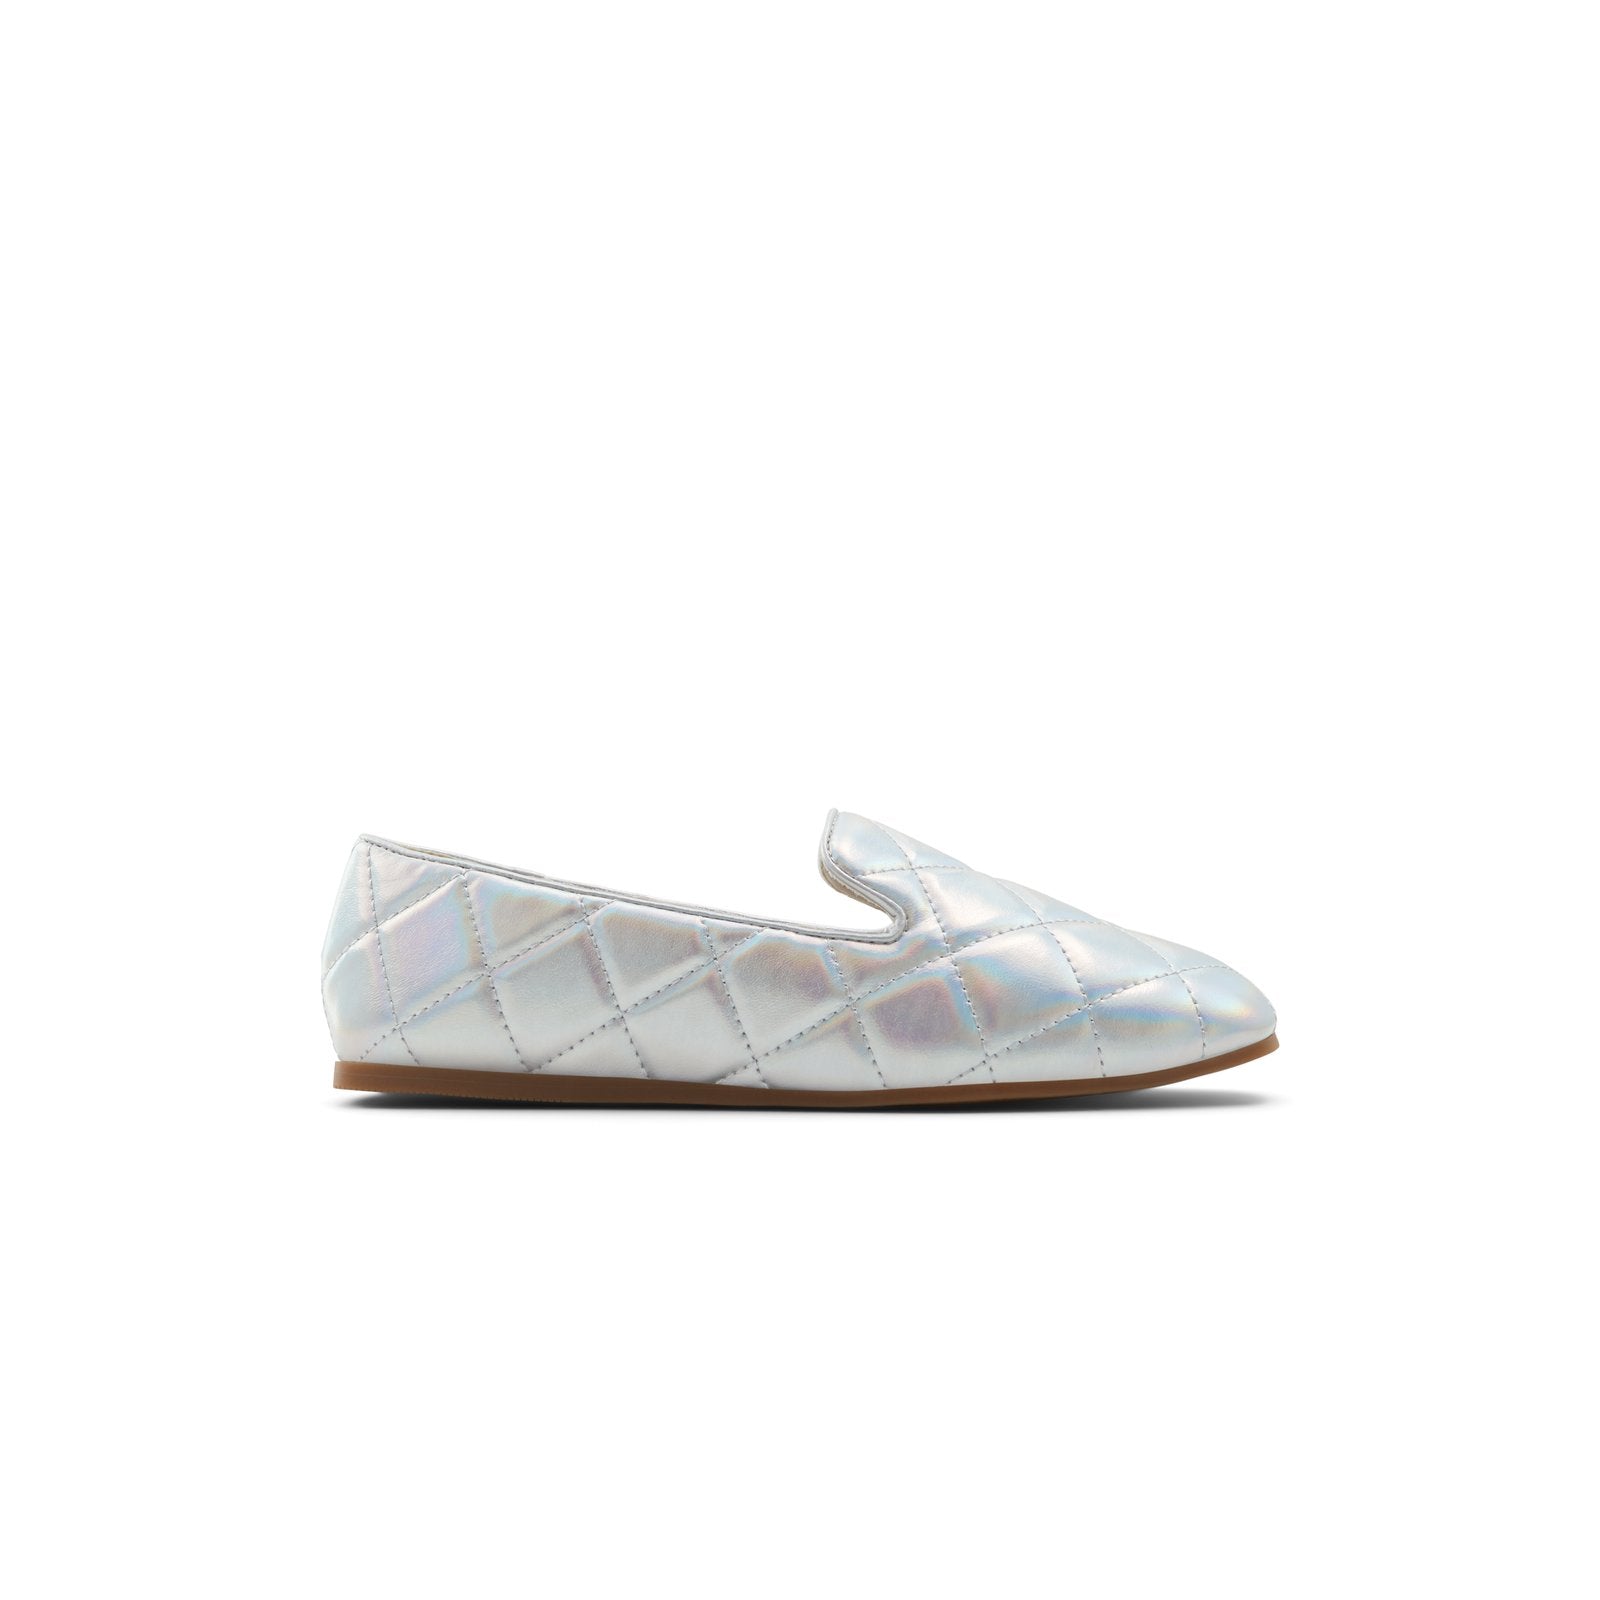 Jessie / Loafers Women Shoes - Silver - CALL IT SPRING KSA